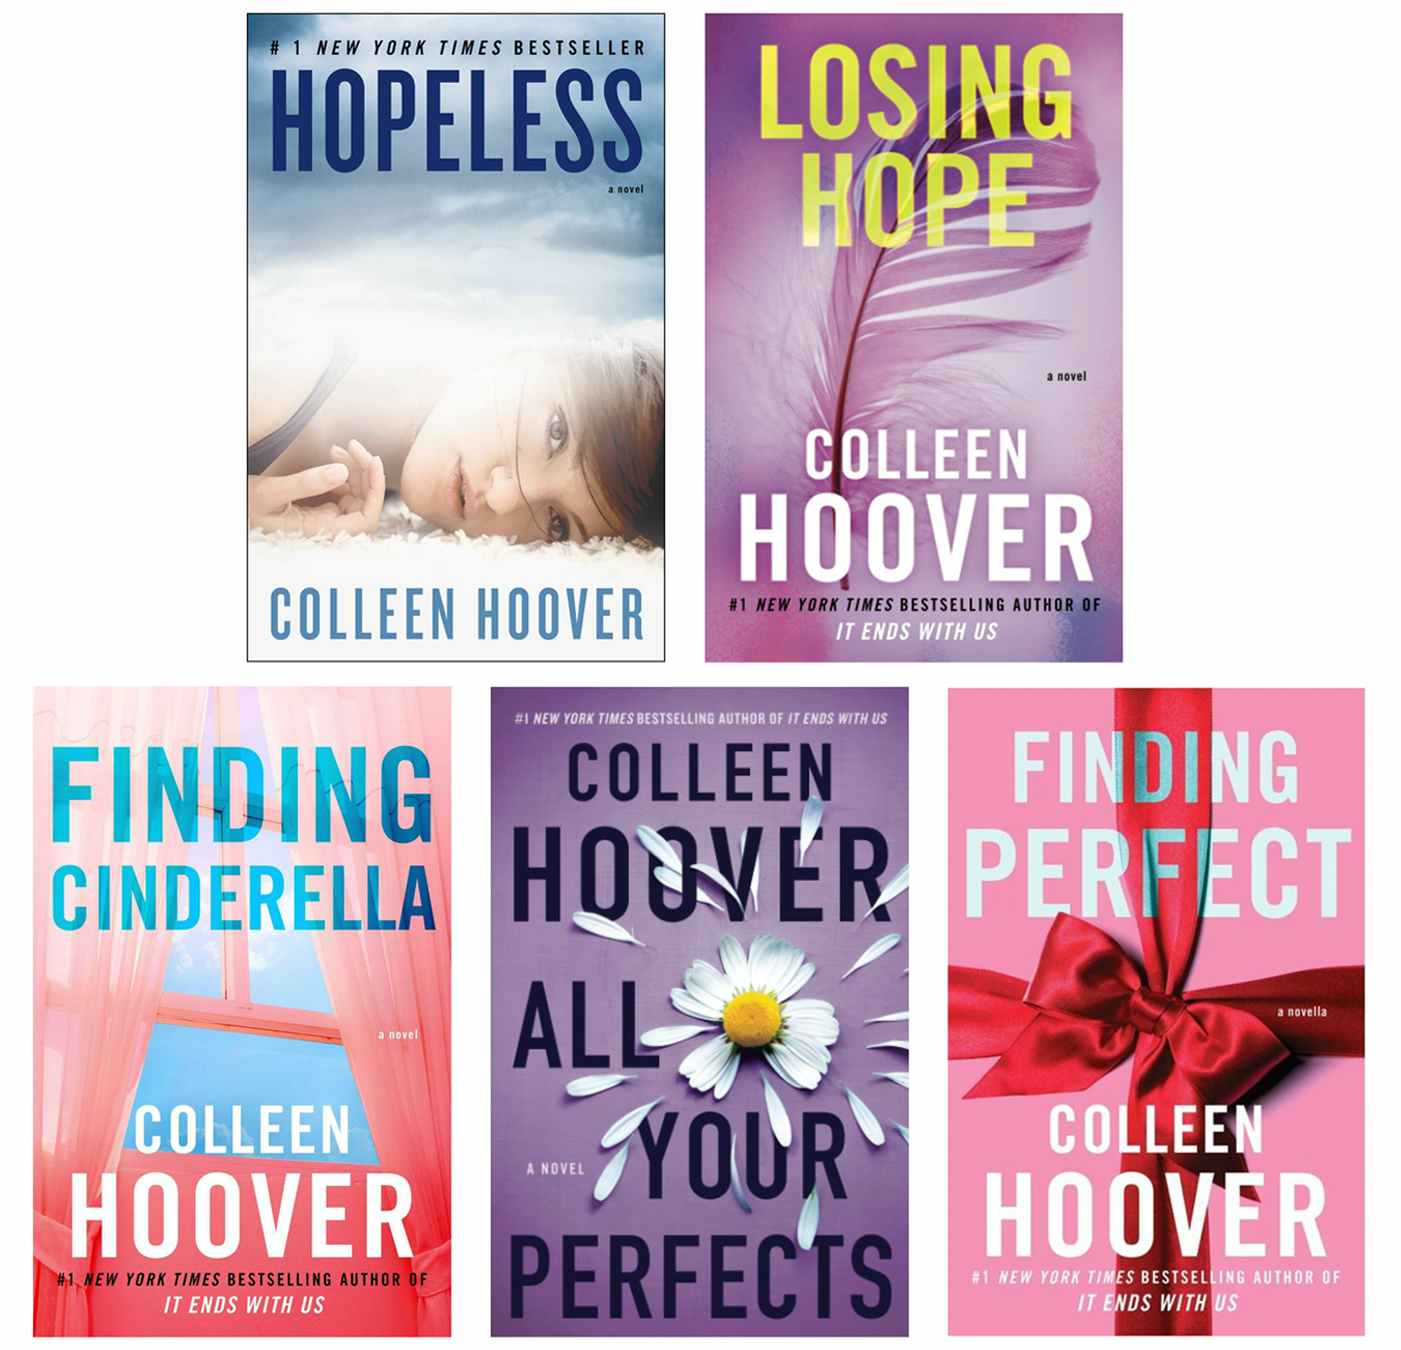 Colleen Hoover's books in order